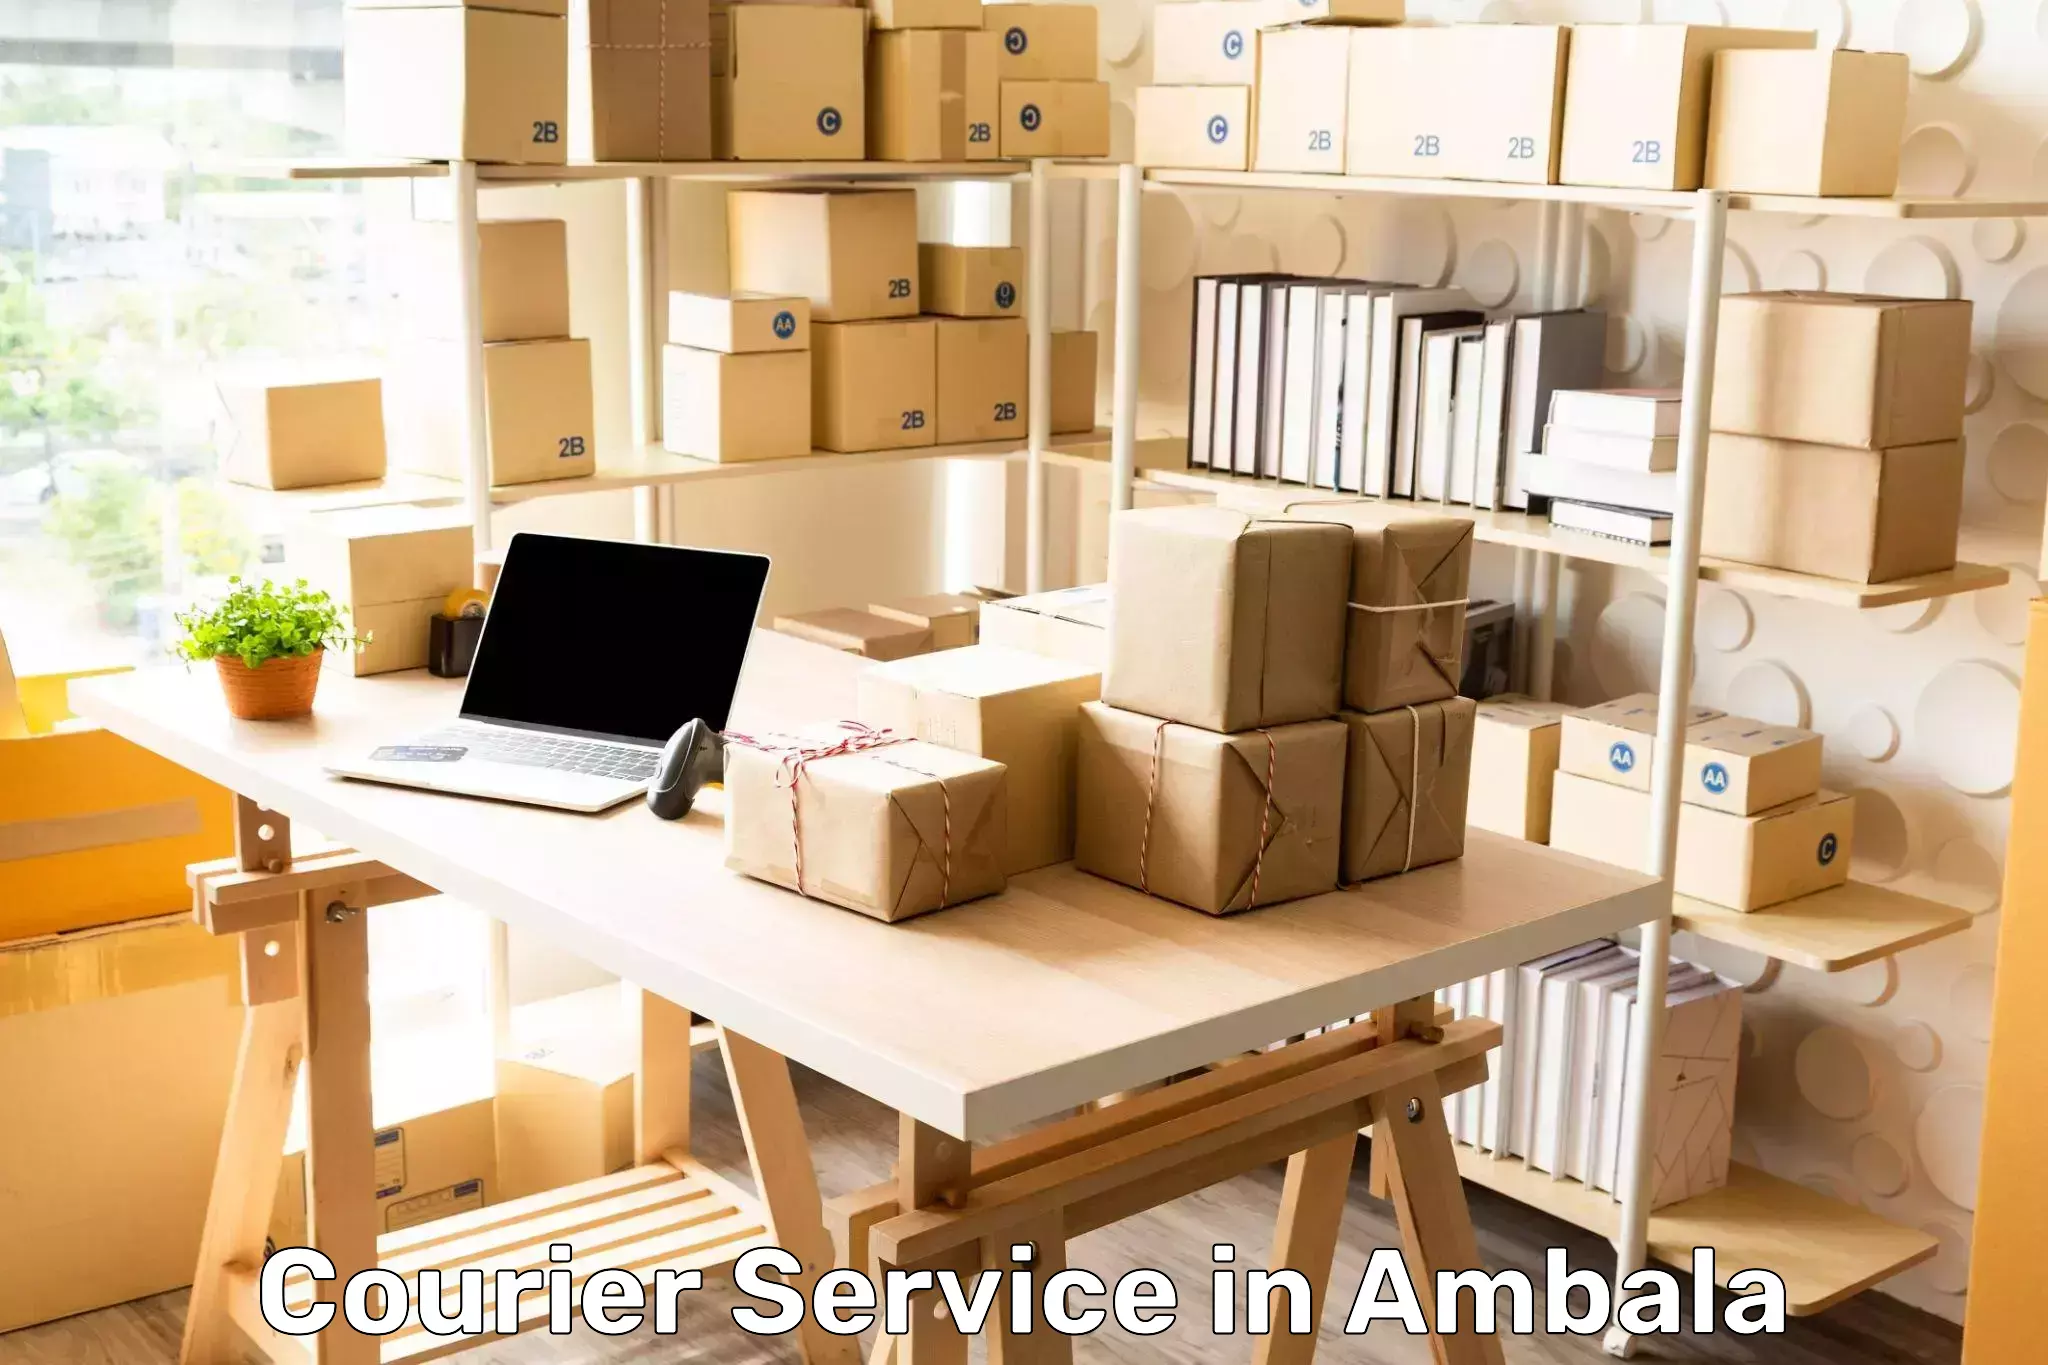 Automated parcel services in Ambala